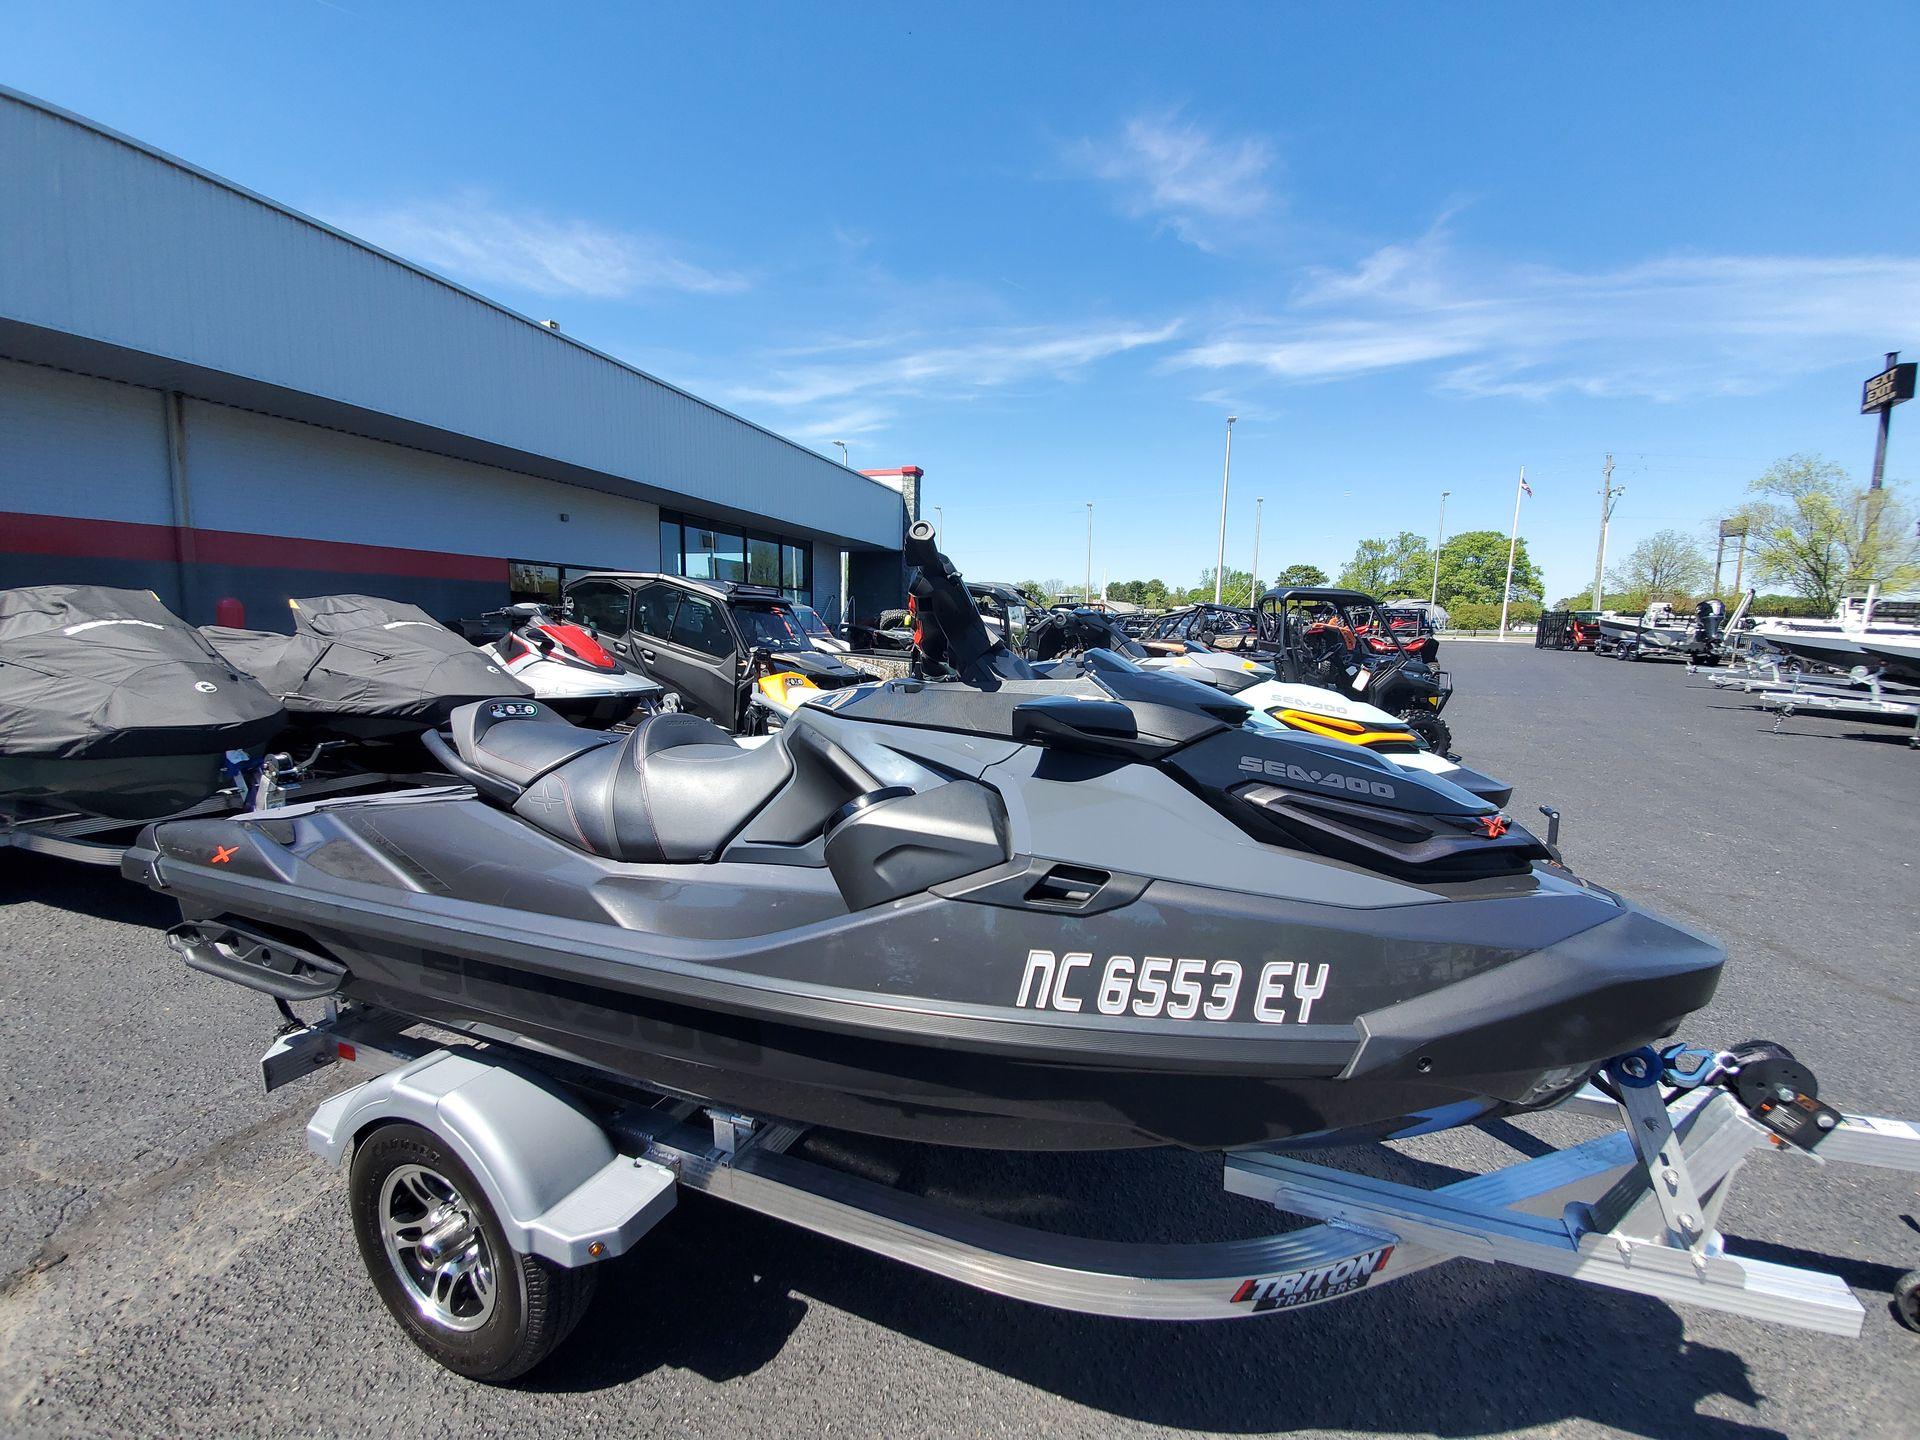 Explore Sea-Doo Rxp Boats For Sale - Boat Trader